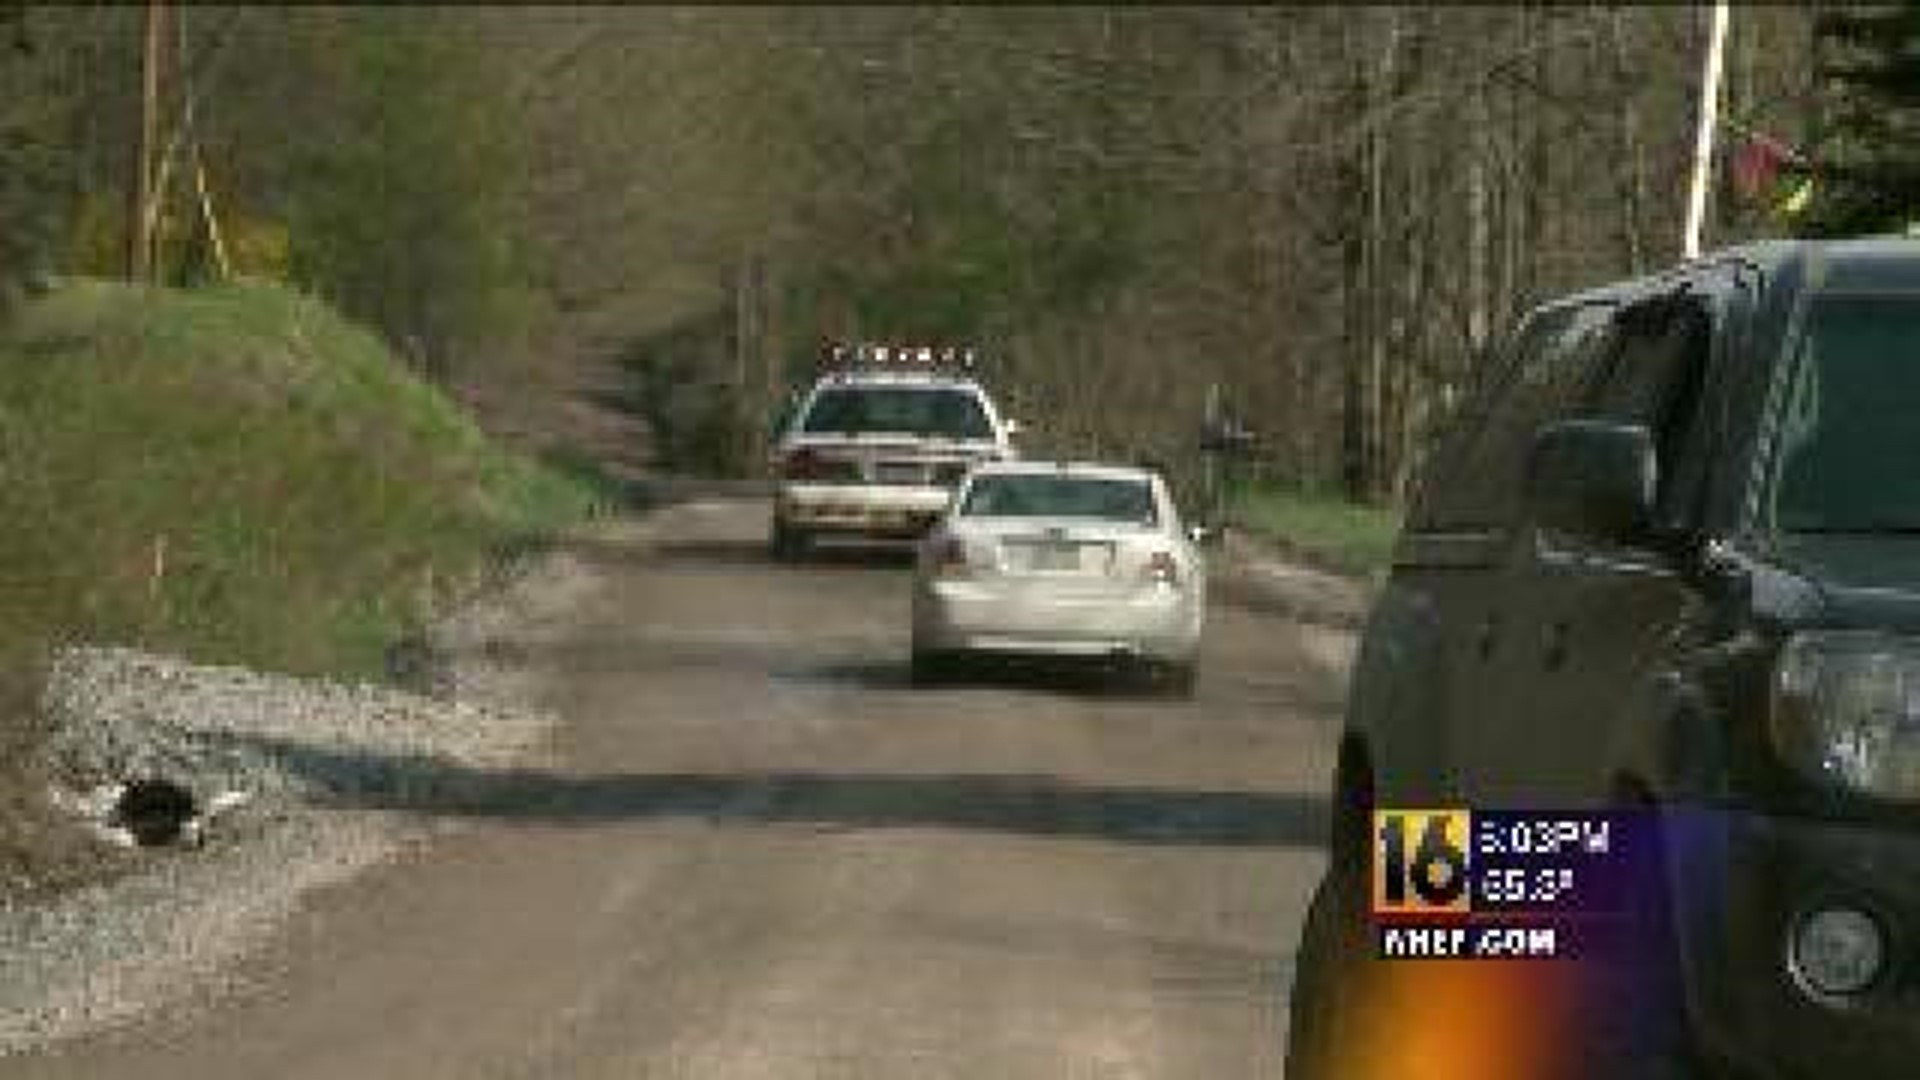 Standoff Ends Peacefully in Susquehanna County